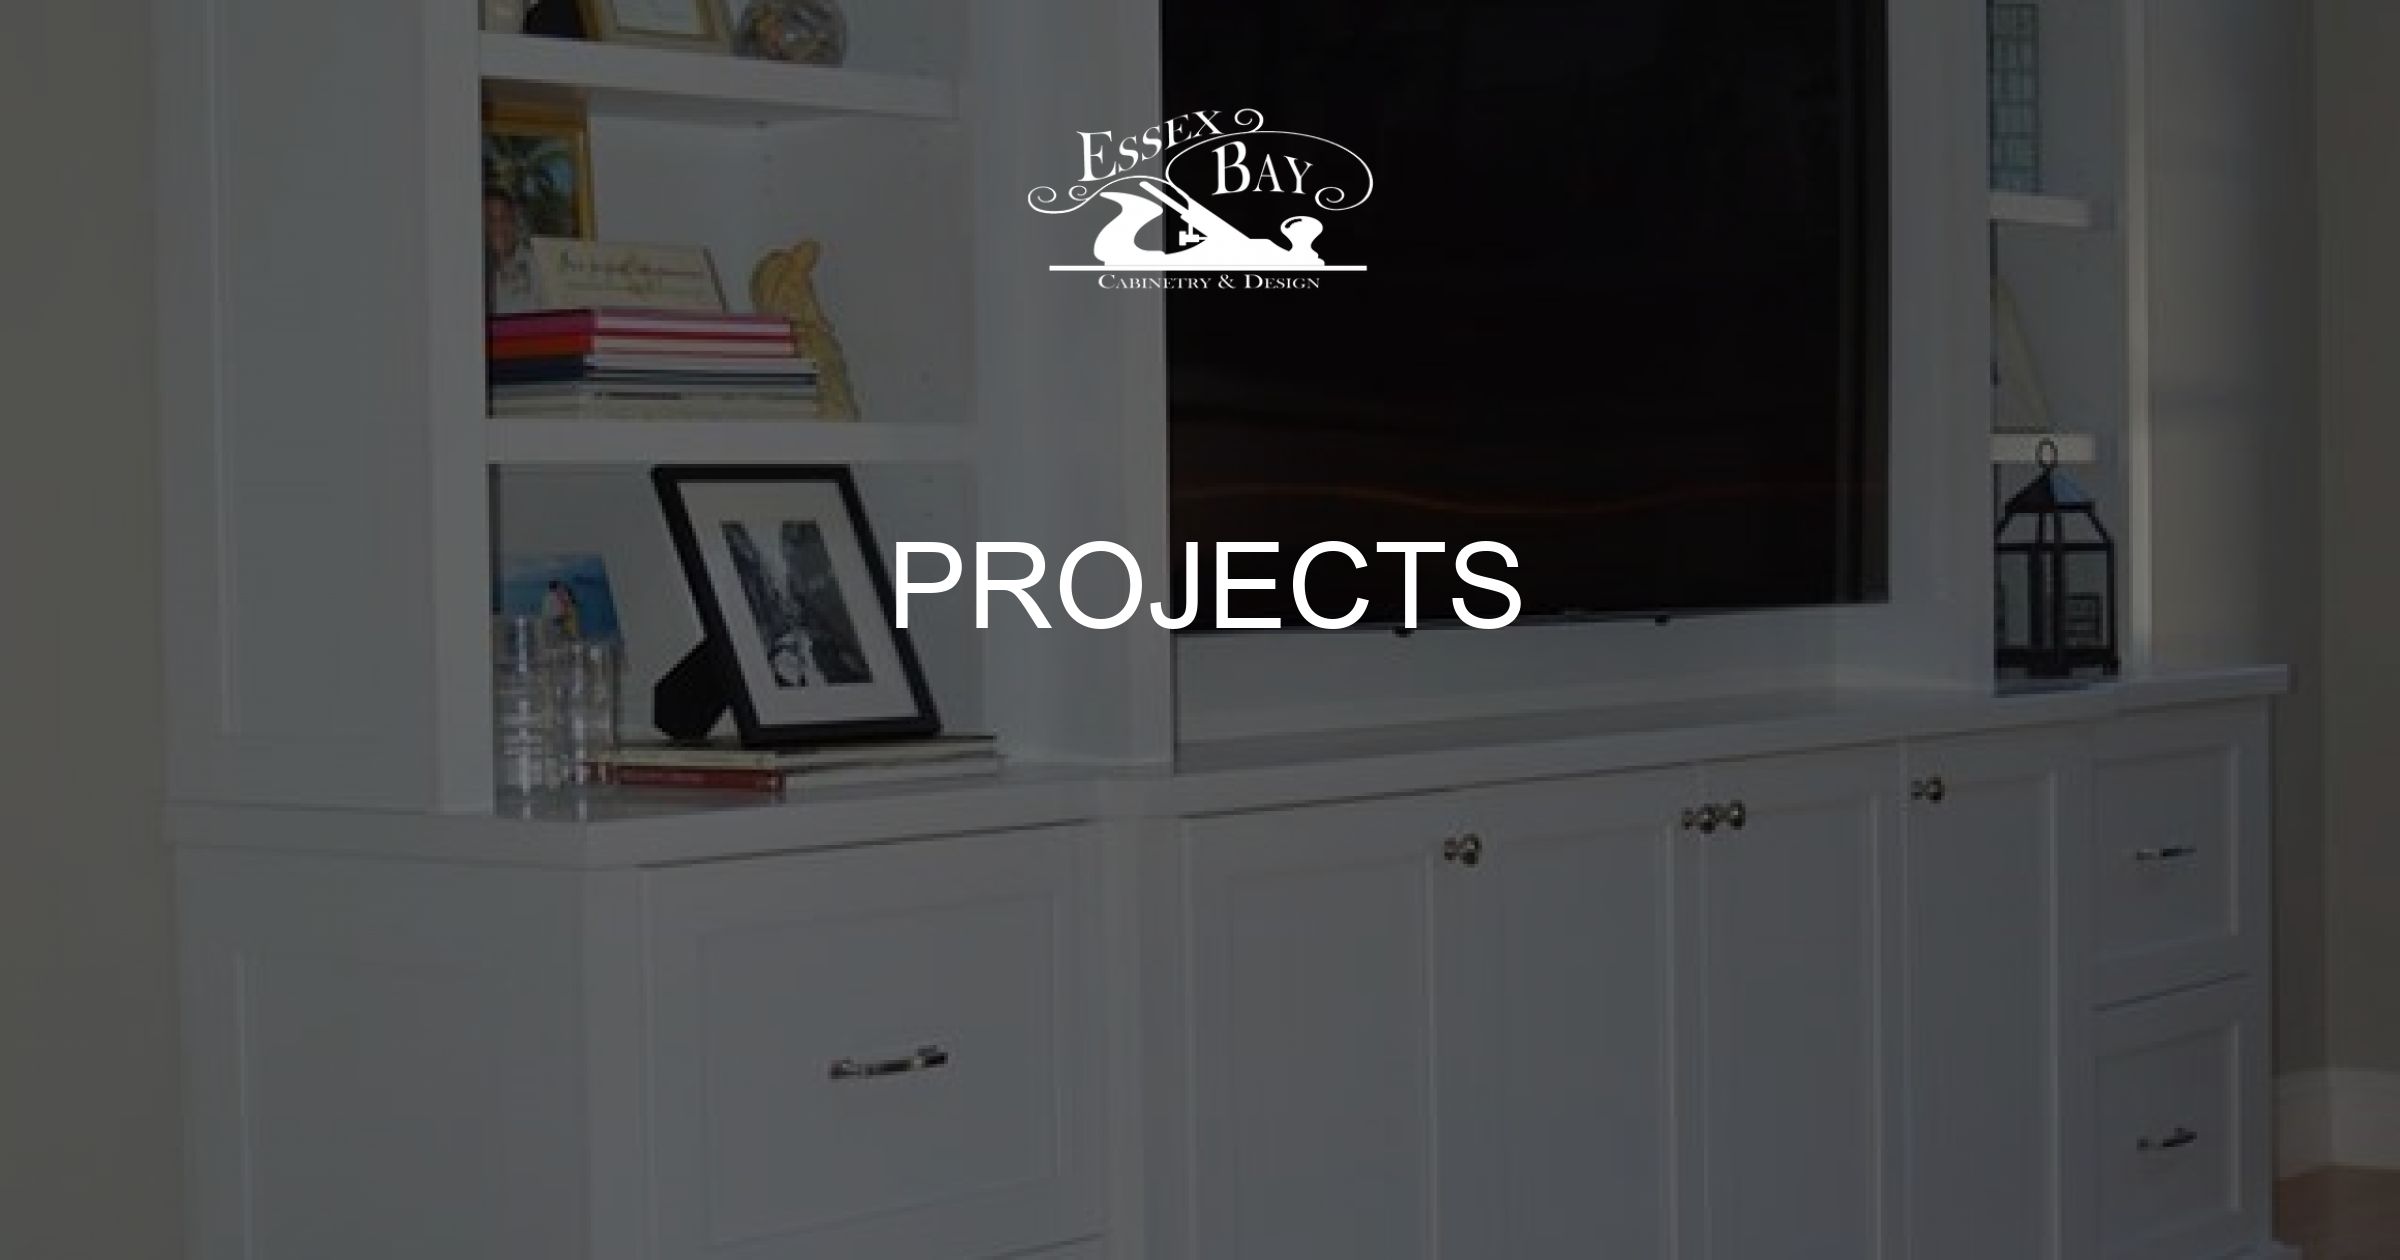 Our Custom Projects Portfolio Essex Bay Cabinetry And Design